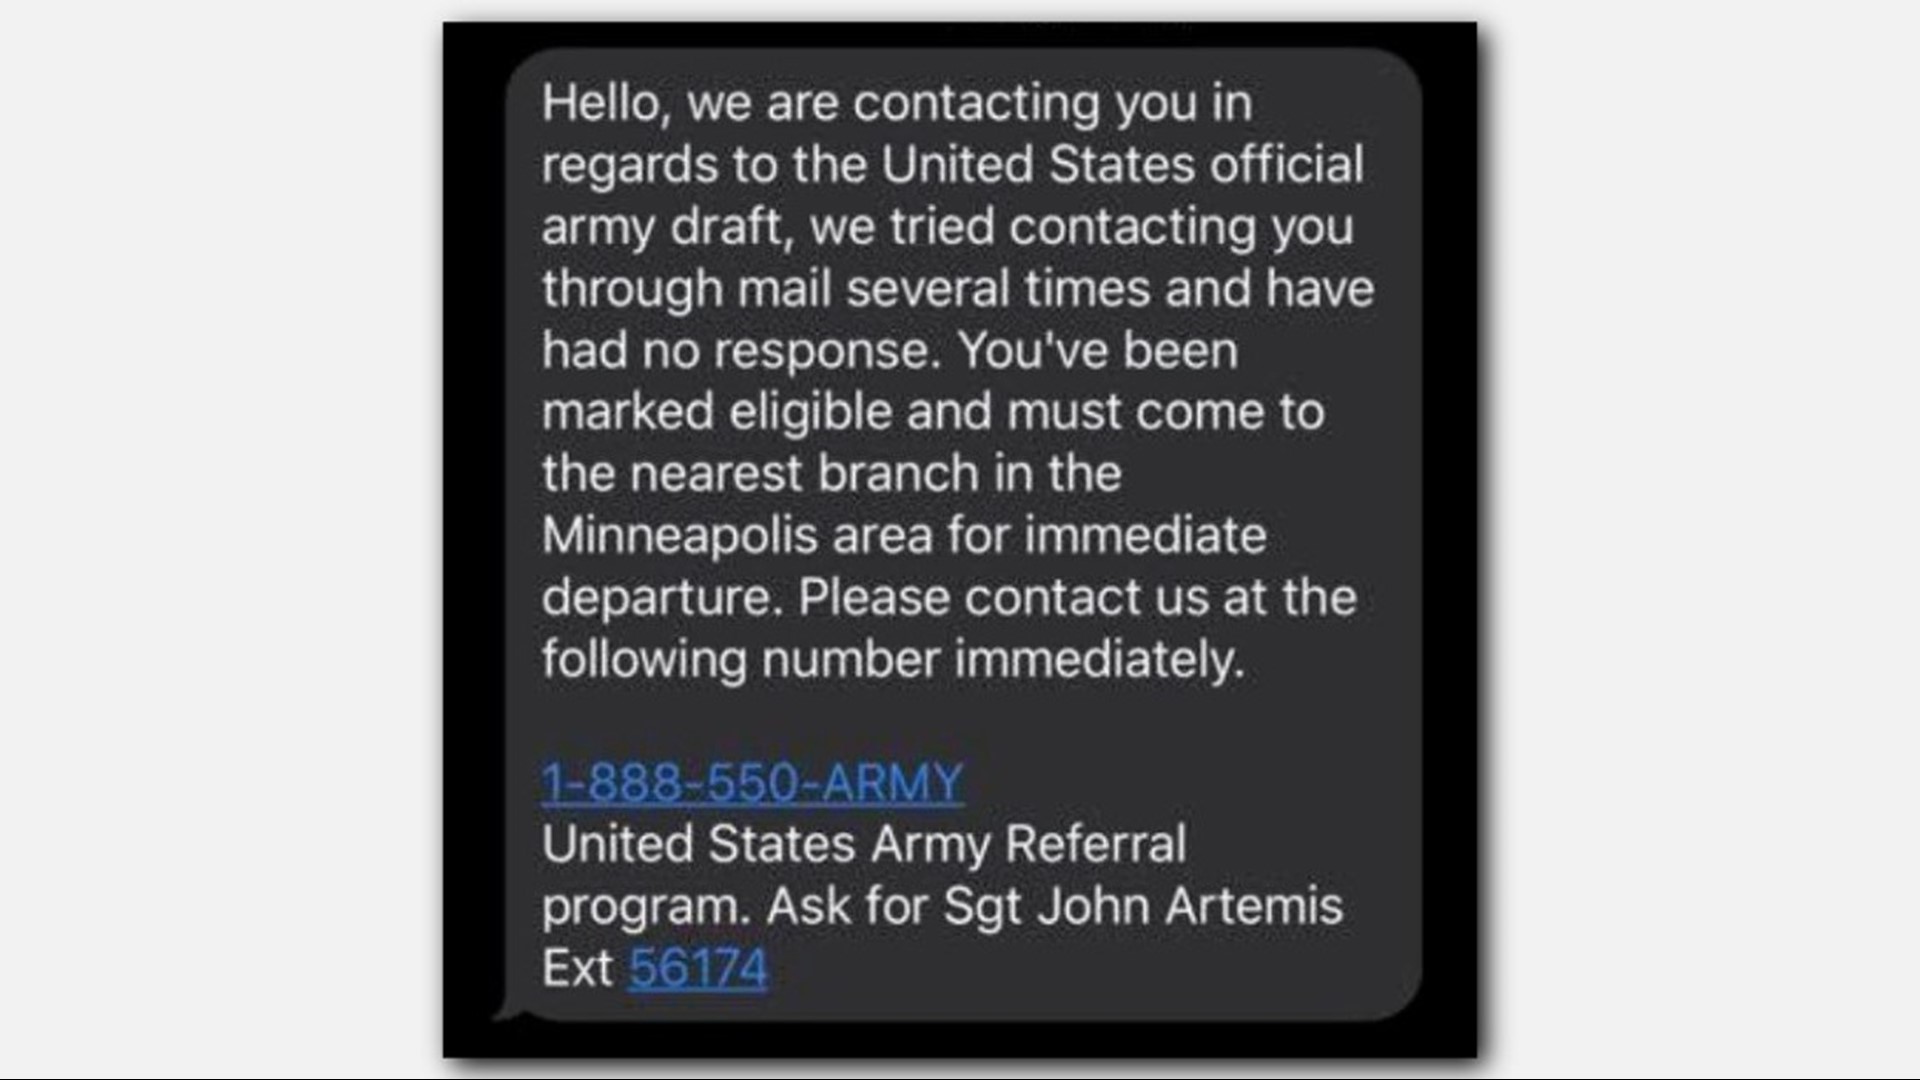 Did you get drafted by the U.S. Army through text message? Is it real? Chris Rogers verifies.